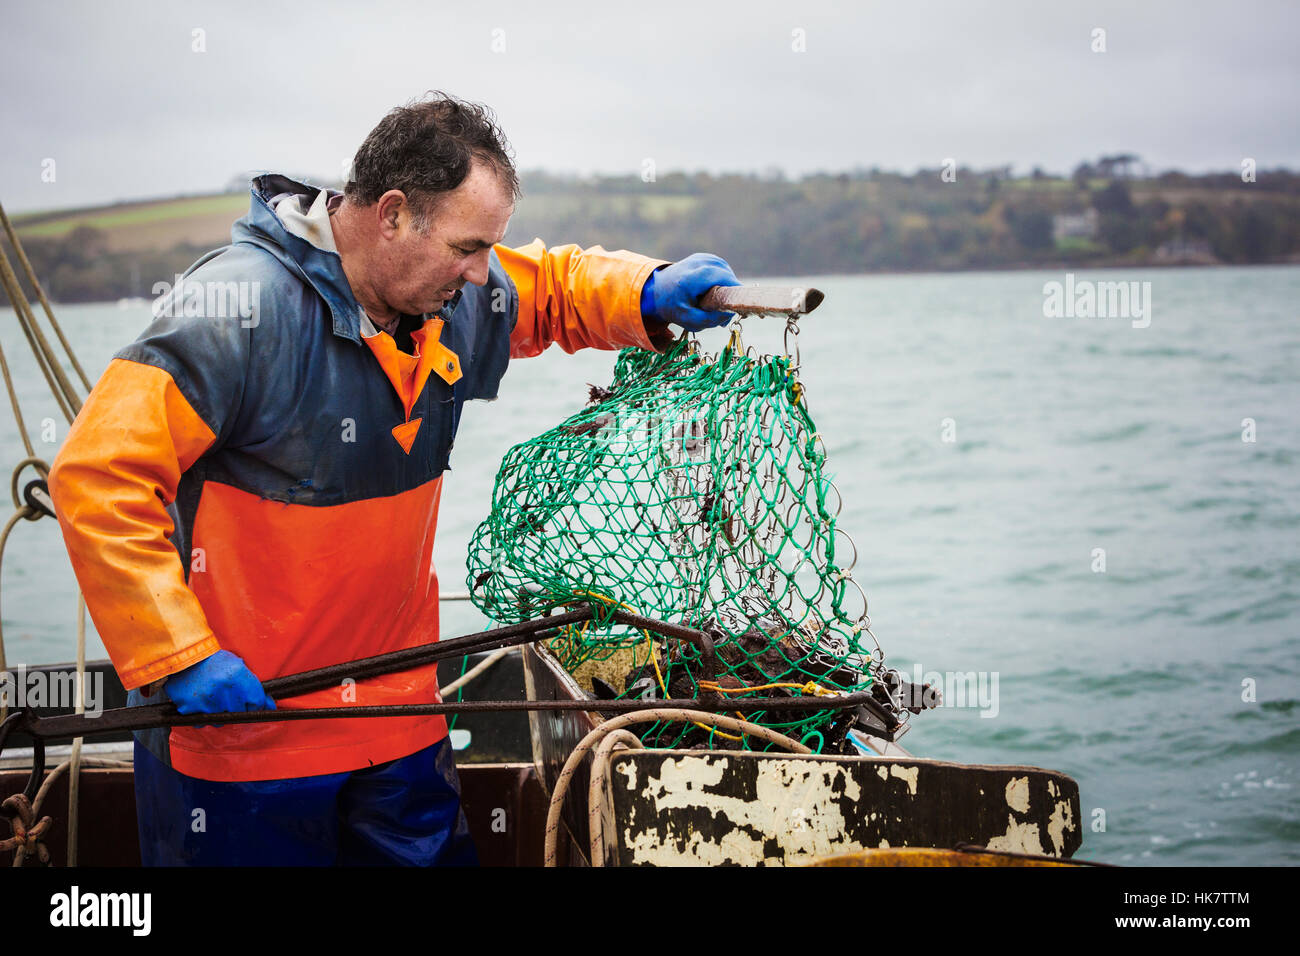 Traditional Sustainable Oyster Fishing. A fisherman opening a fishing creel on a boat deck. Stock Photo